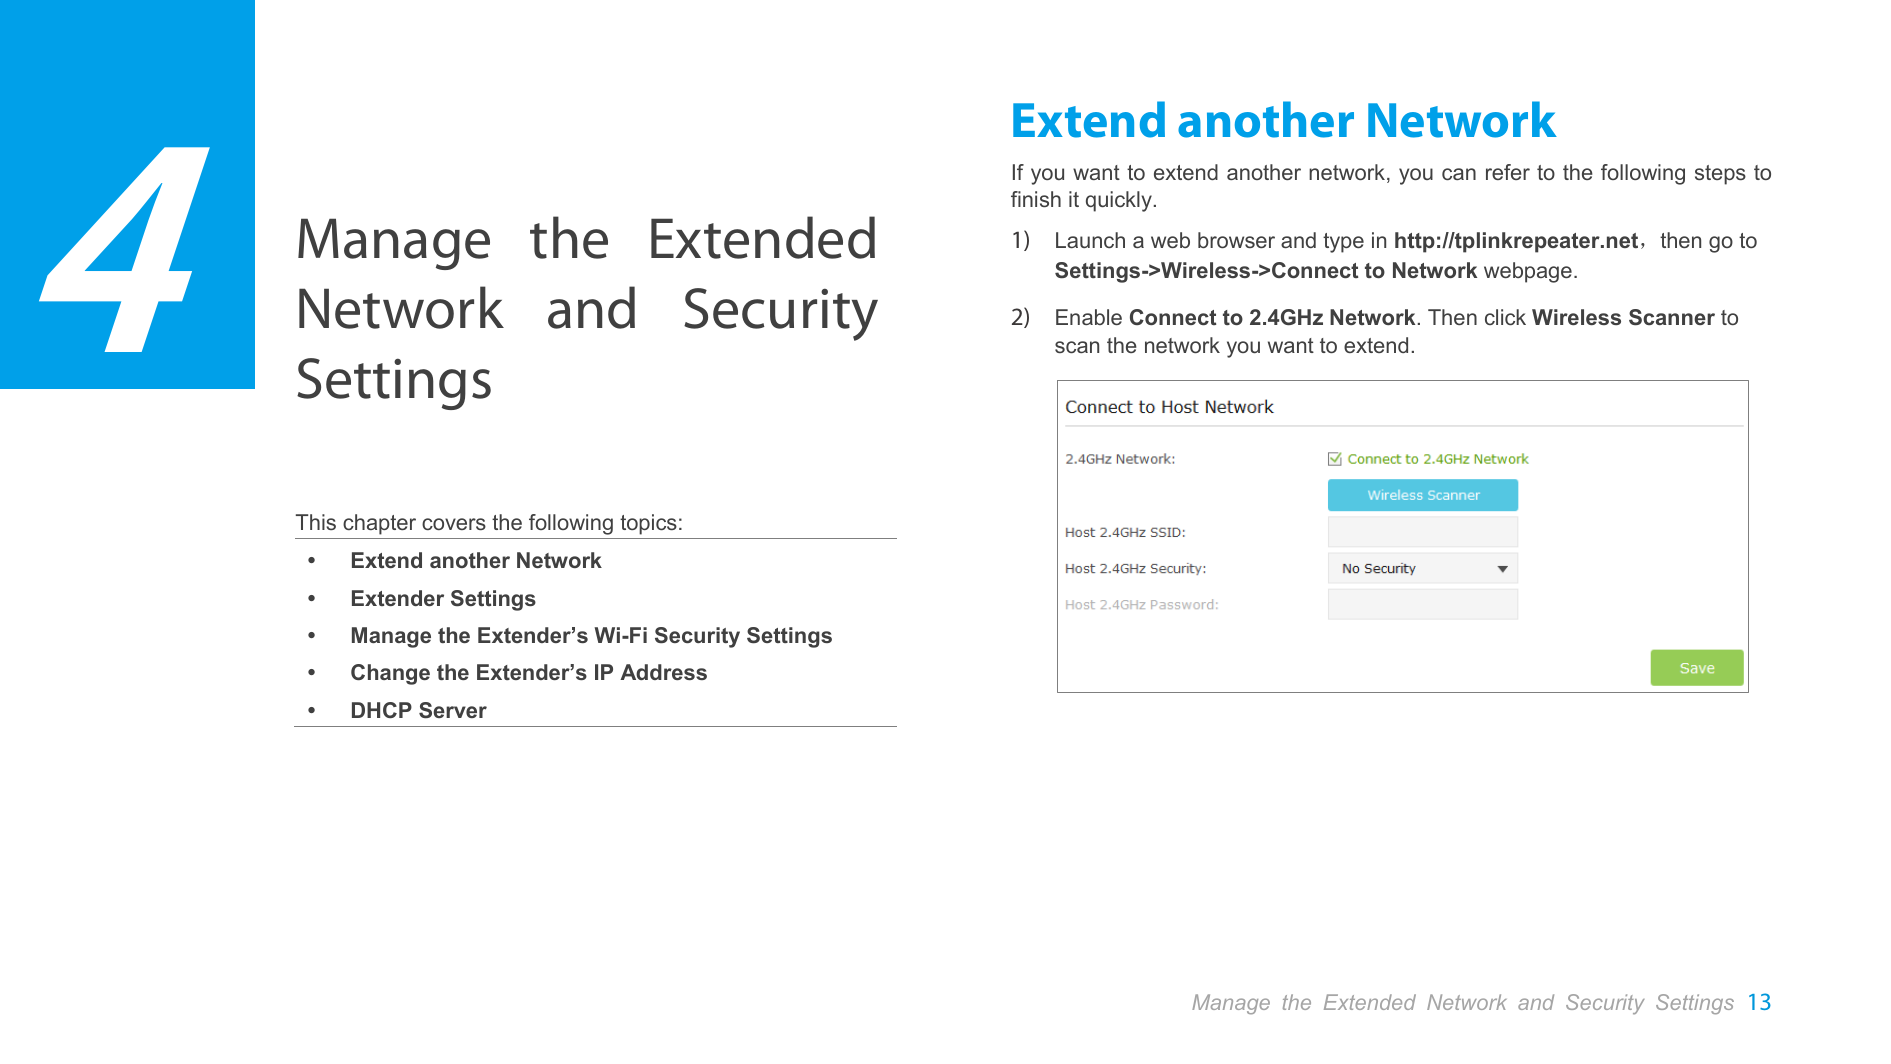  Manage the Extended Network and Security Settings   This chapter covers the following topics:  Extend another Network  Extender Settings  Manage the Extender’s Wi-Fi Security Settings  Change the Extender’s IP Address  DHCP Server Extend another Network If you want to extend another network, you can refer to the following steps to finish it quickly. 1) Launch a web browser and type in http://tplinkrepeater.net，then go to Settings-&gt;Wireless-&gt;Connect to Network webpage. 2) Enable Connect to 2.4GHz Network. Then click Wireless Scanner to scan the network you want to extend.         4 Manage the Extended Network and Security Settings 13  